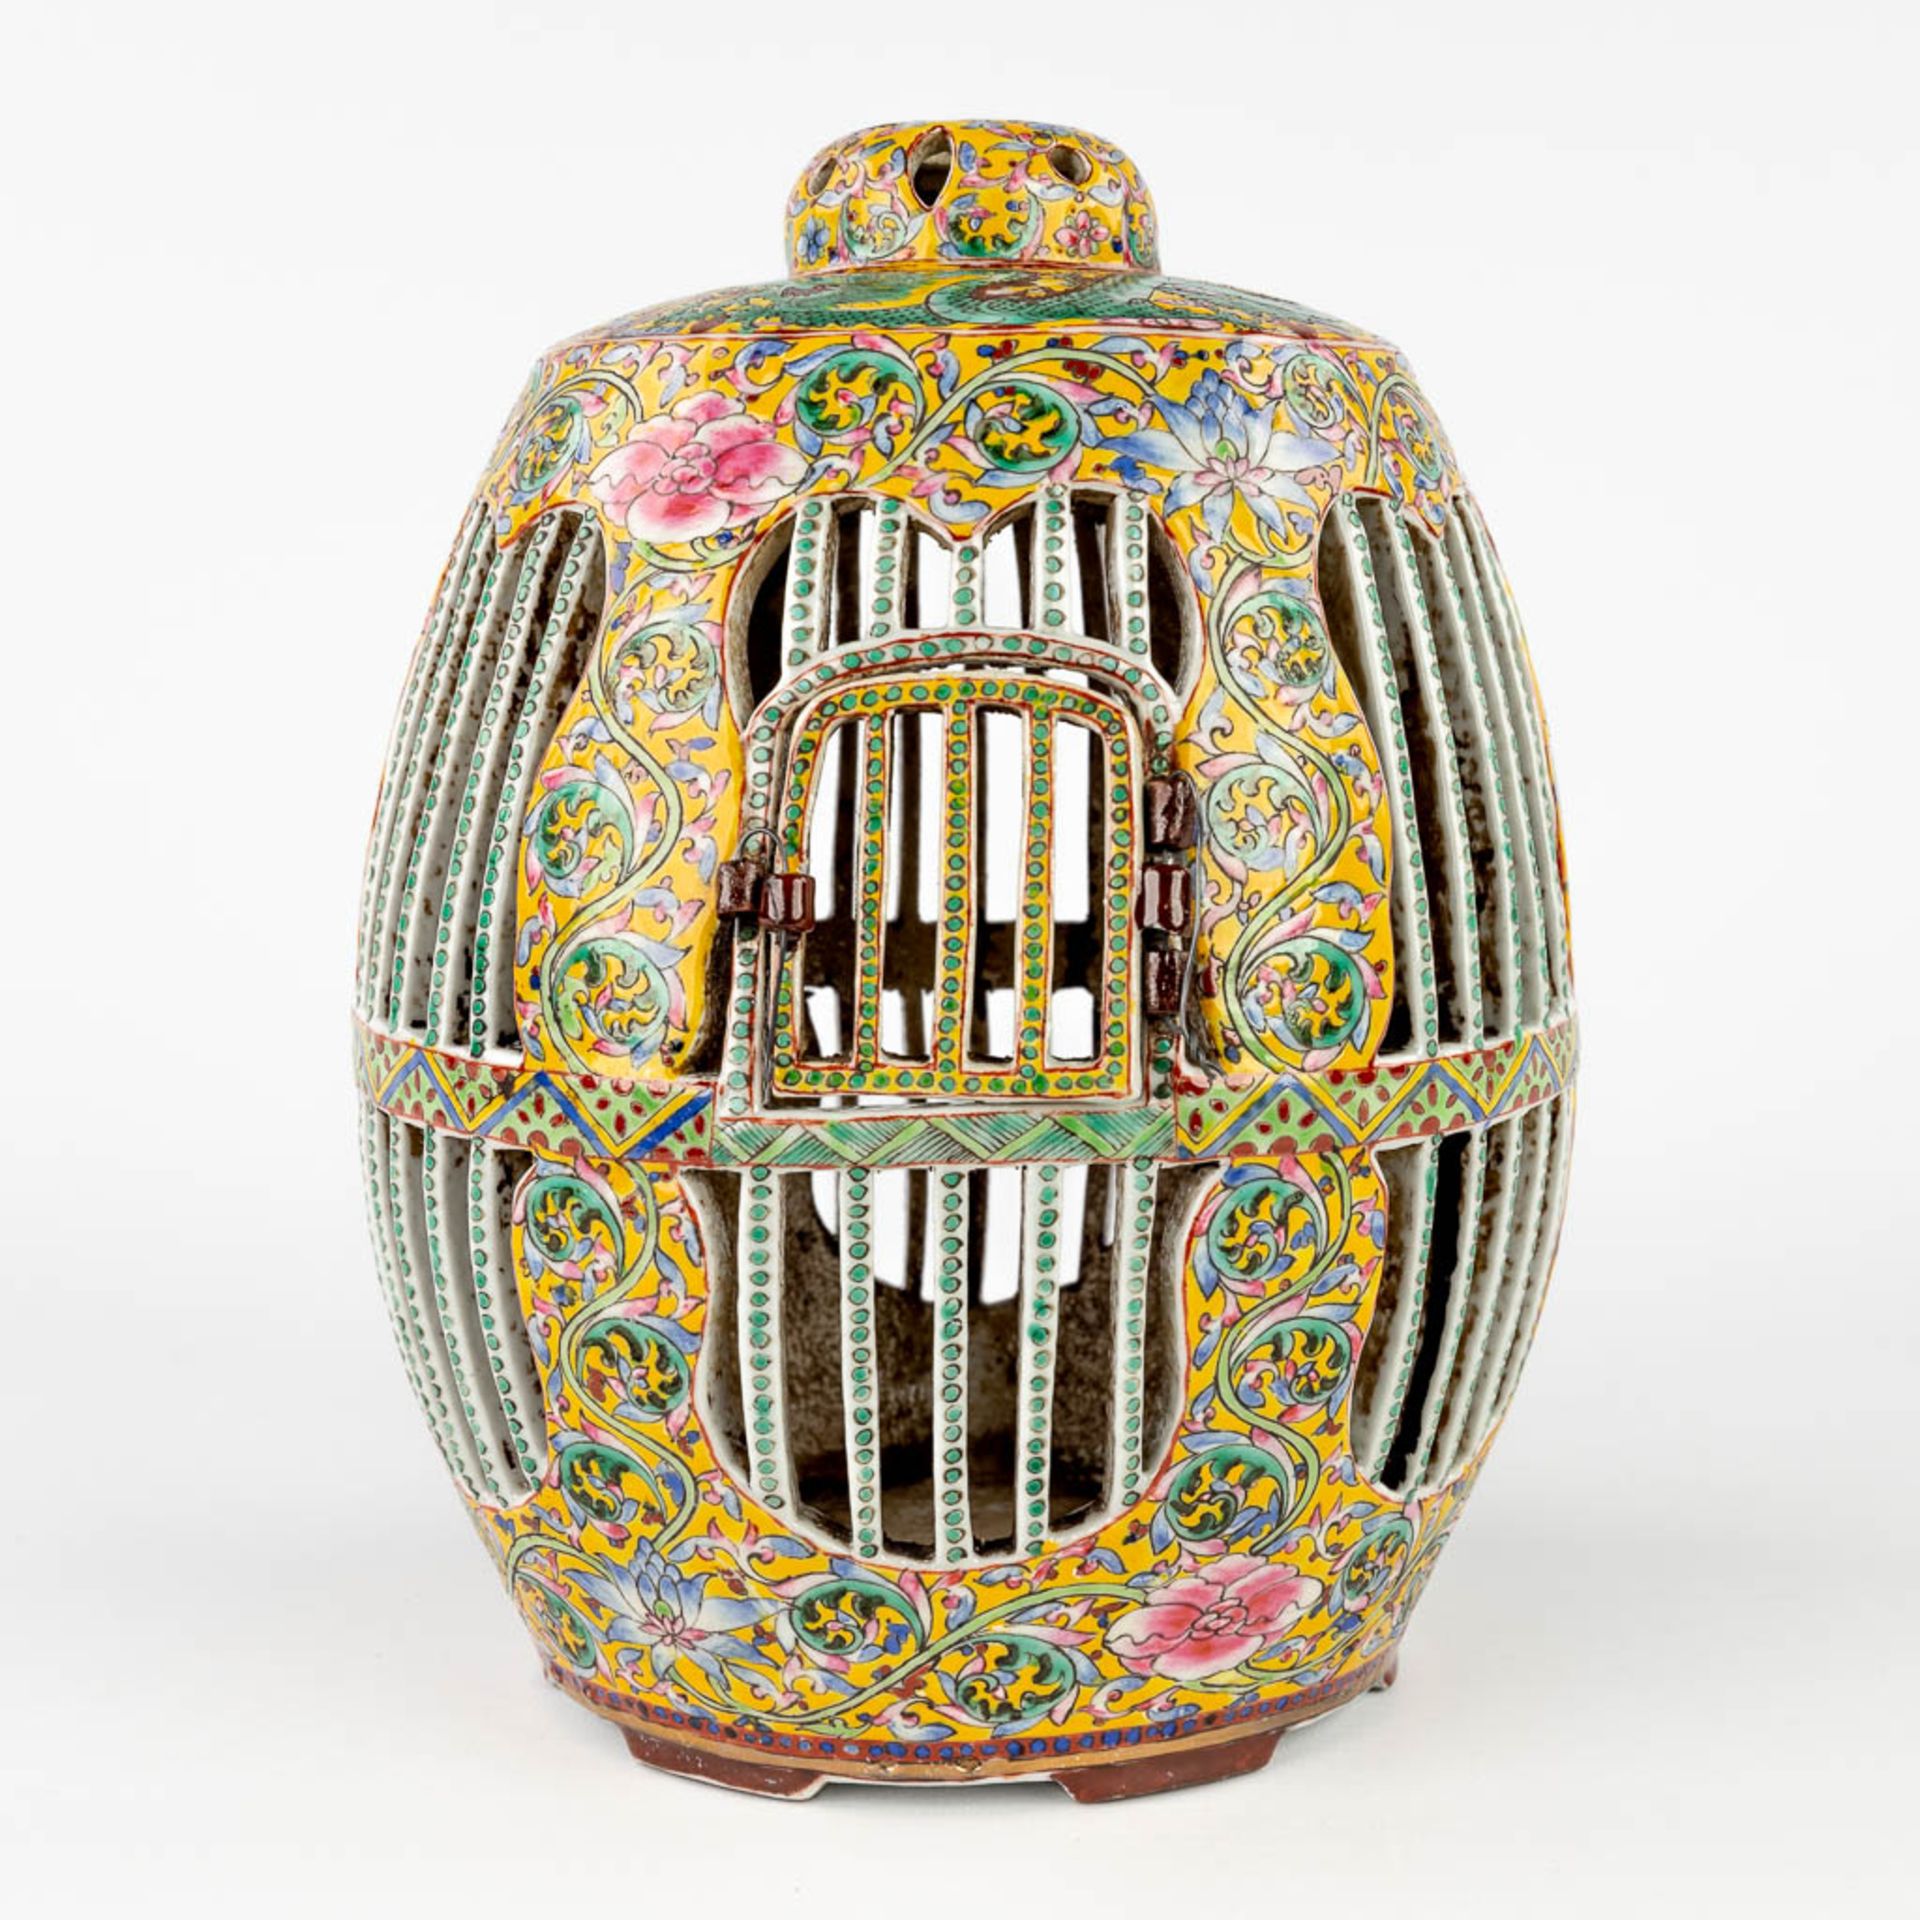 A Chinese porcelain 'Bird Cage', Famille Rose, Qianlong Mark. 20th C. (H:25 x D:19 cm)